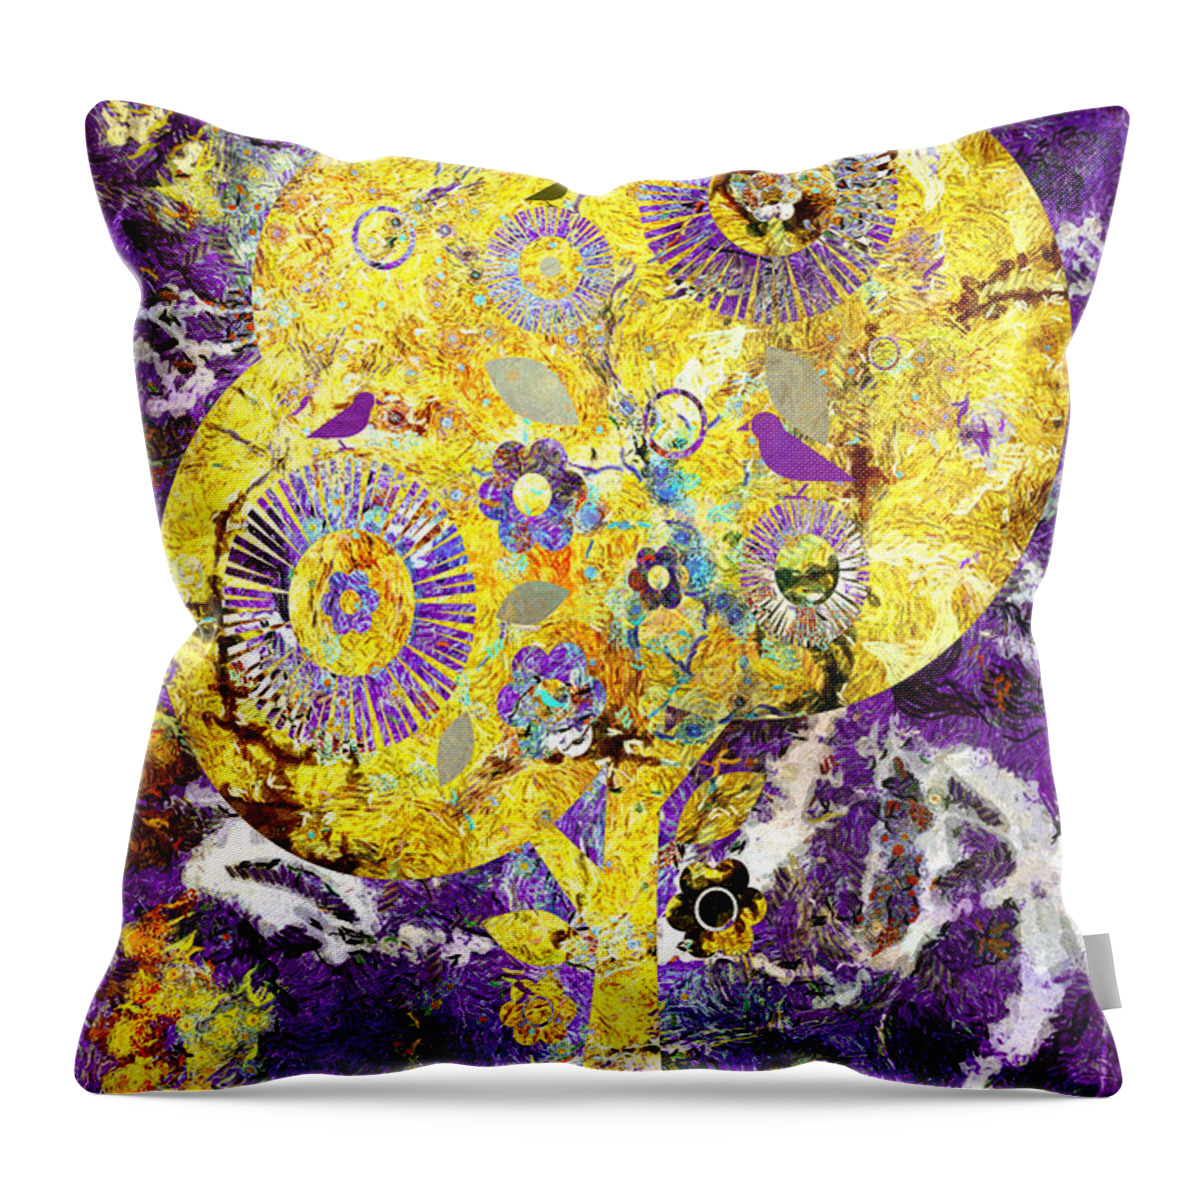 Abstract Throw Pillow featuring the mixed media Birds Of A Feather 1 by Angelina Tamez